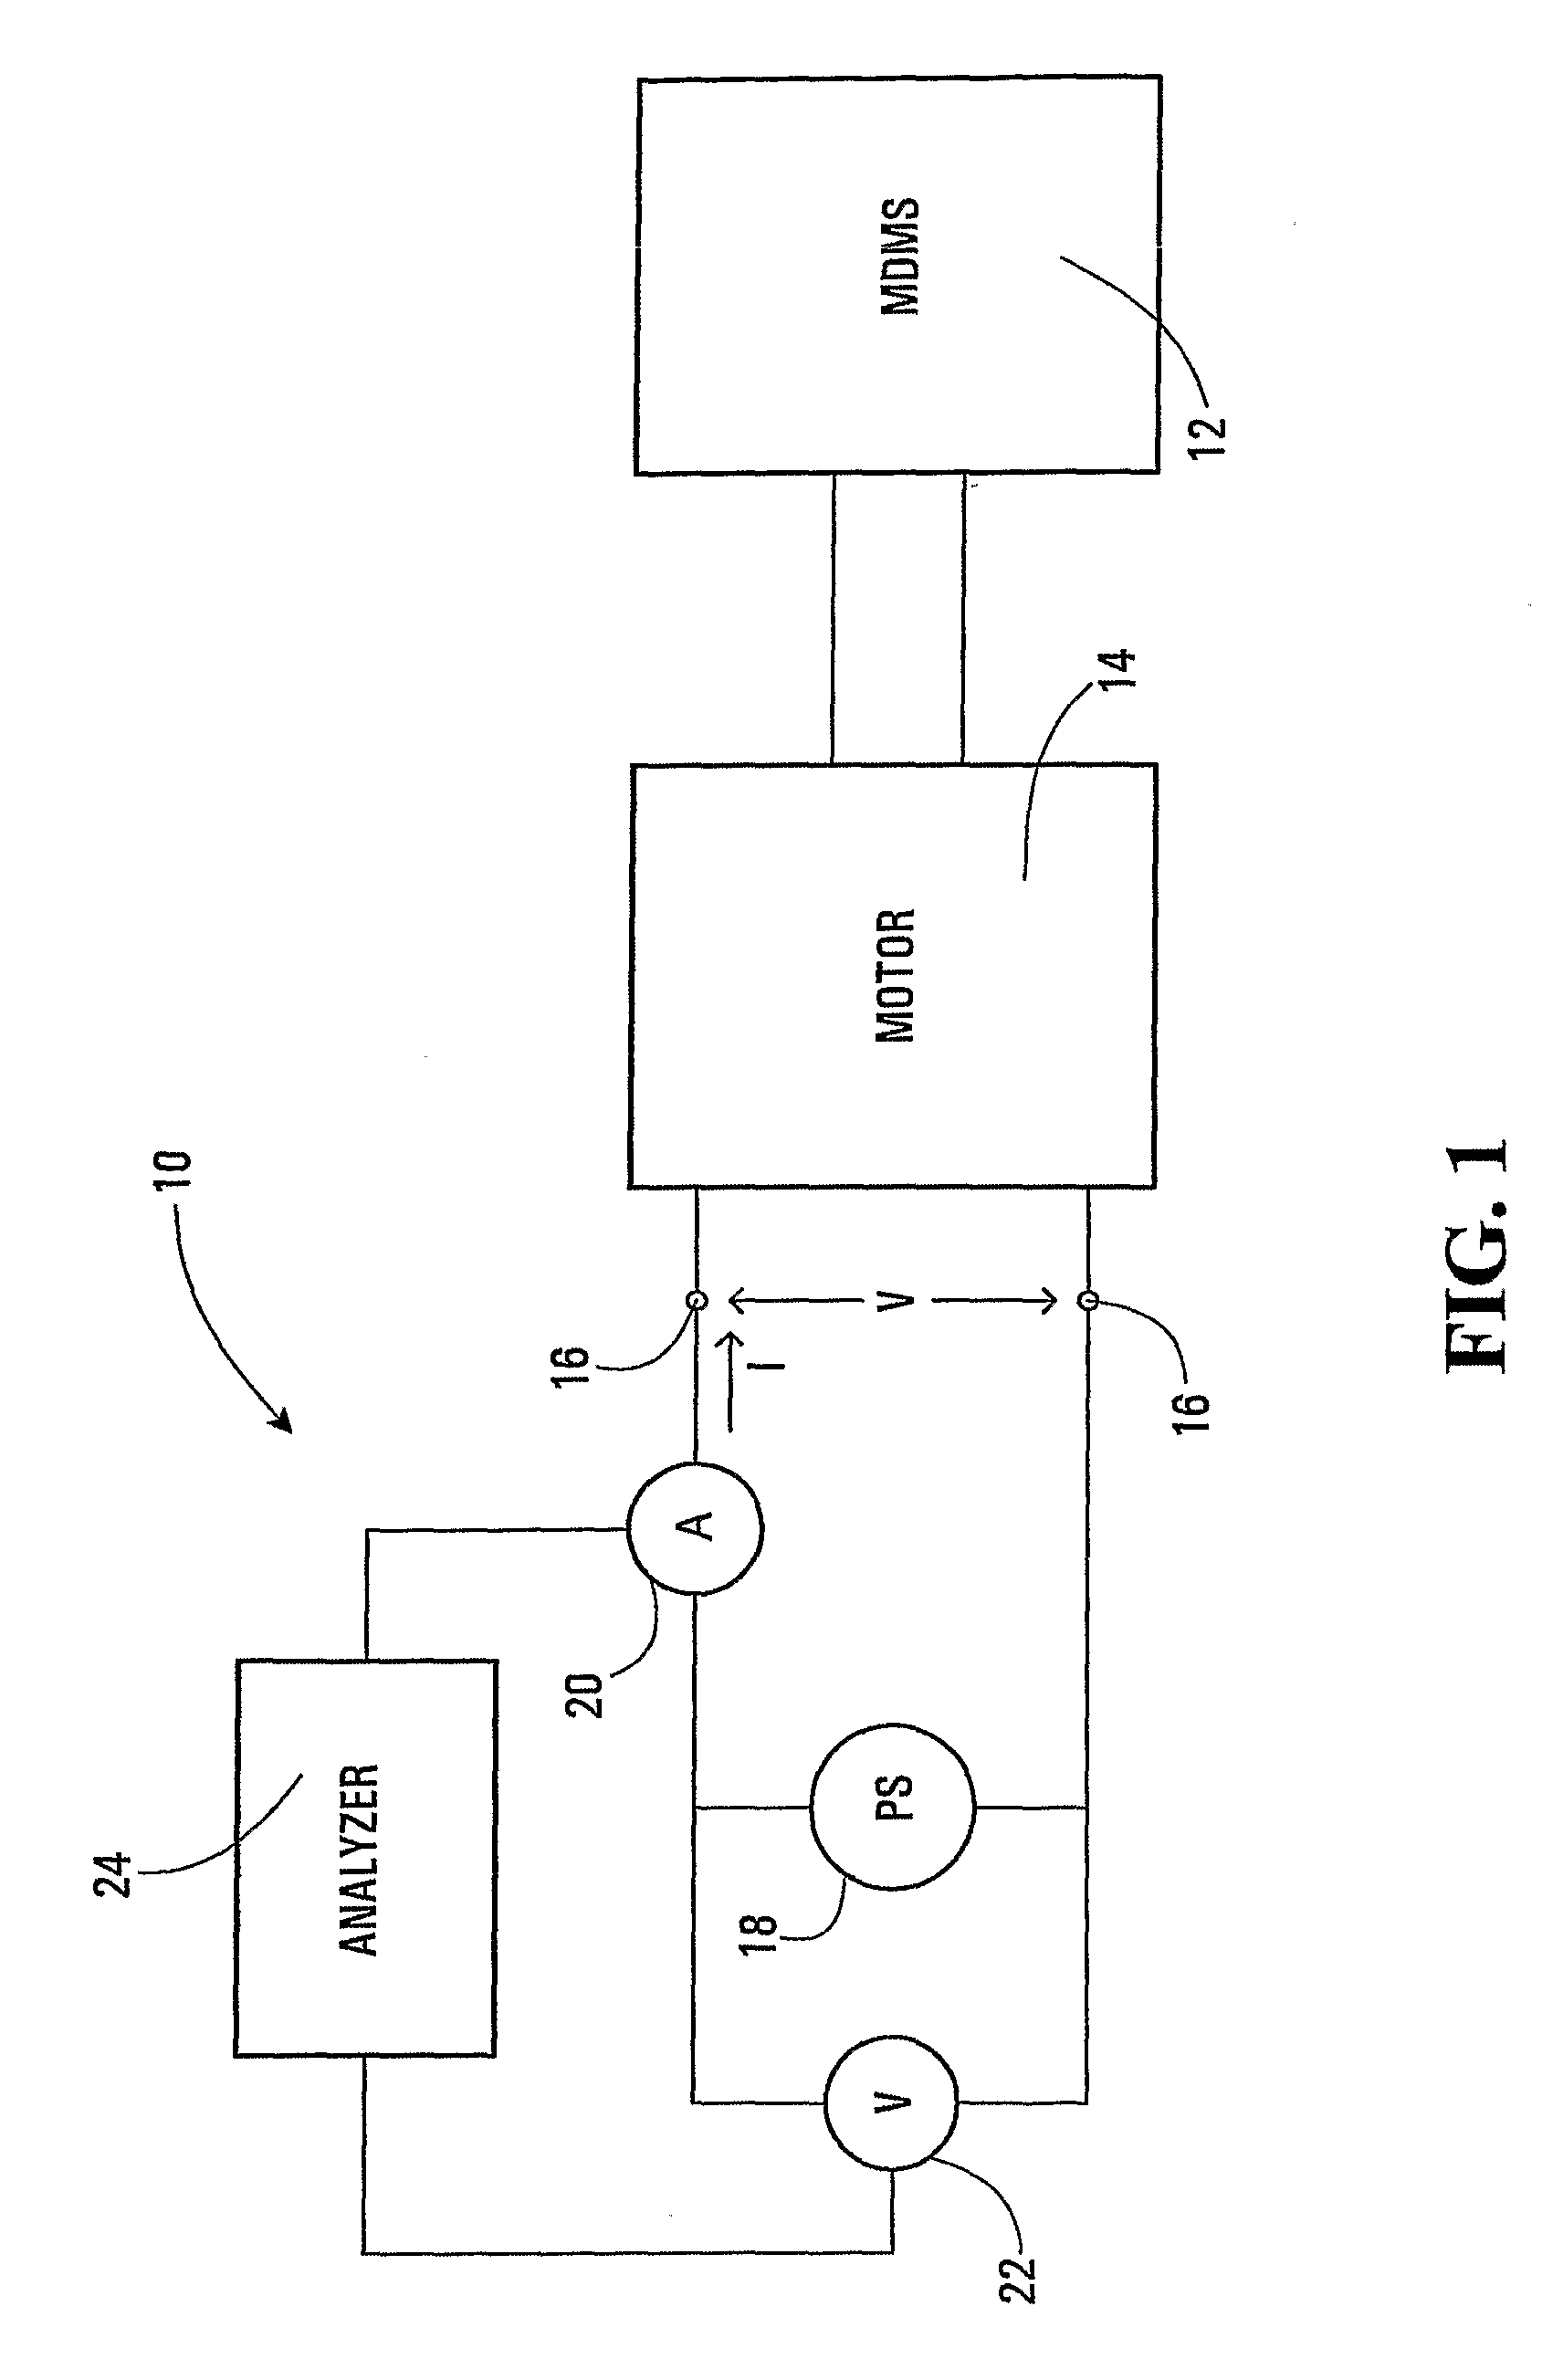 Method and Apparatus for Assessing Condition of Motor-Driven Mechanical System